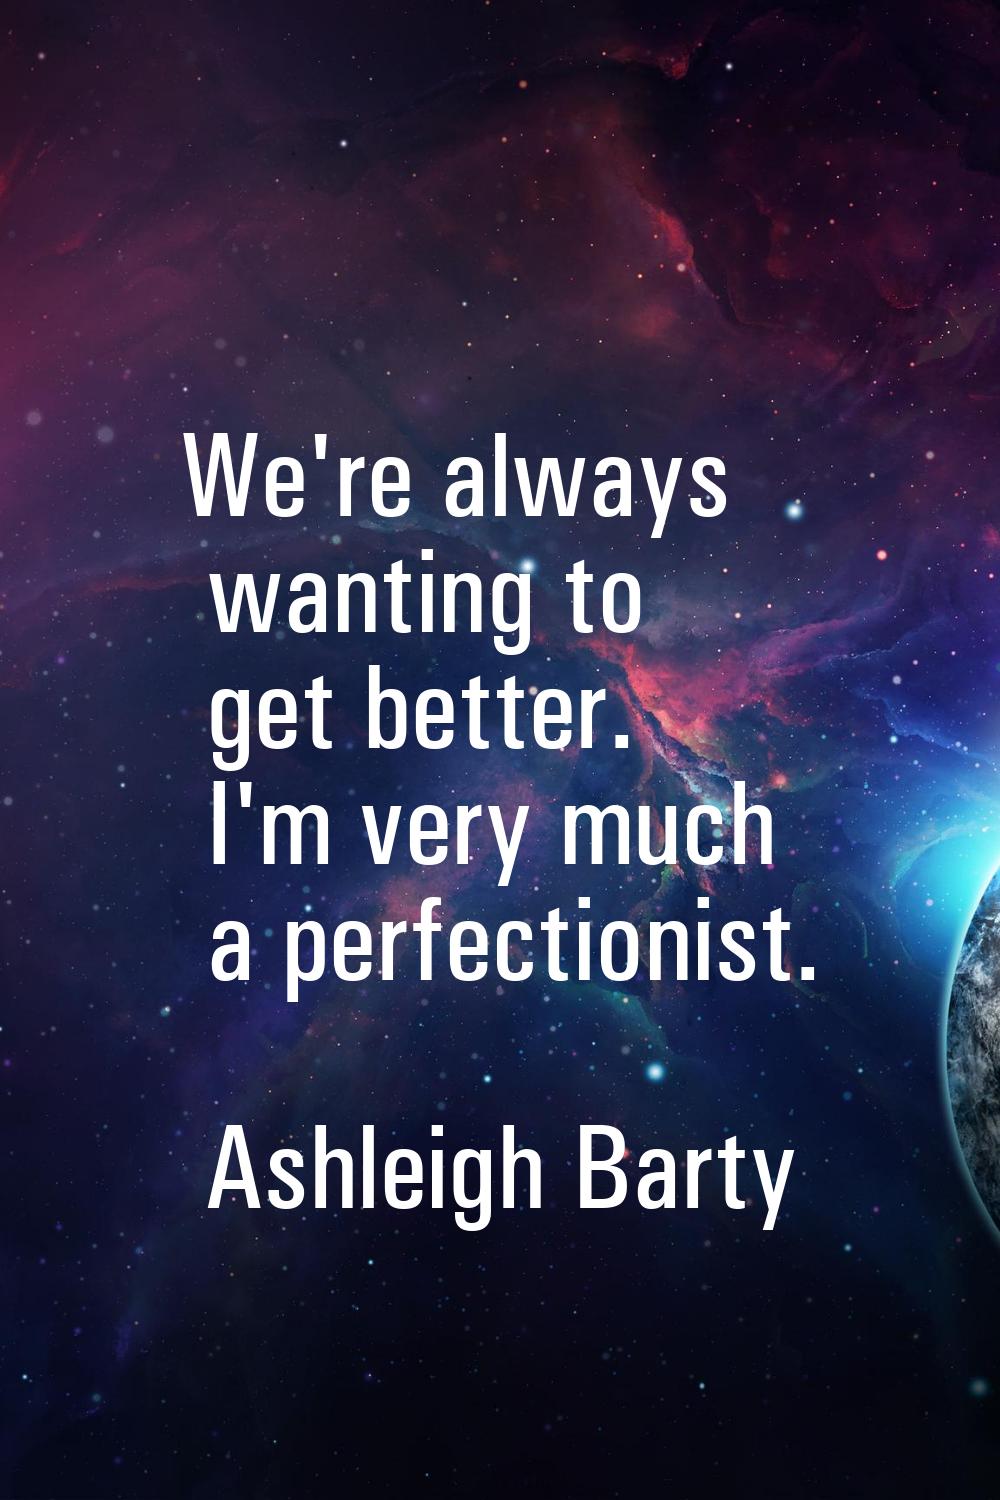 We're always wanting to get better. I'm very much a perfectionist.